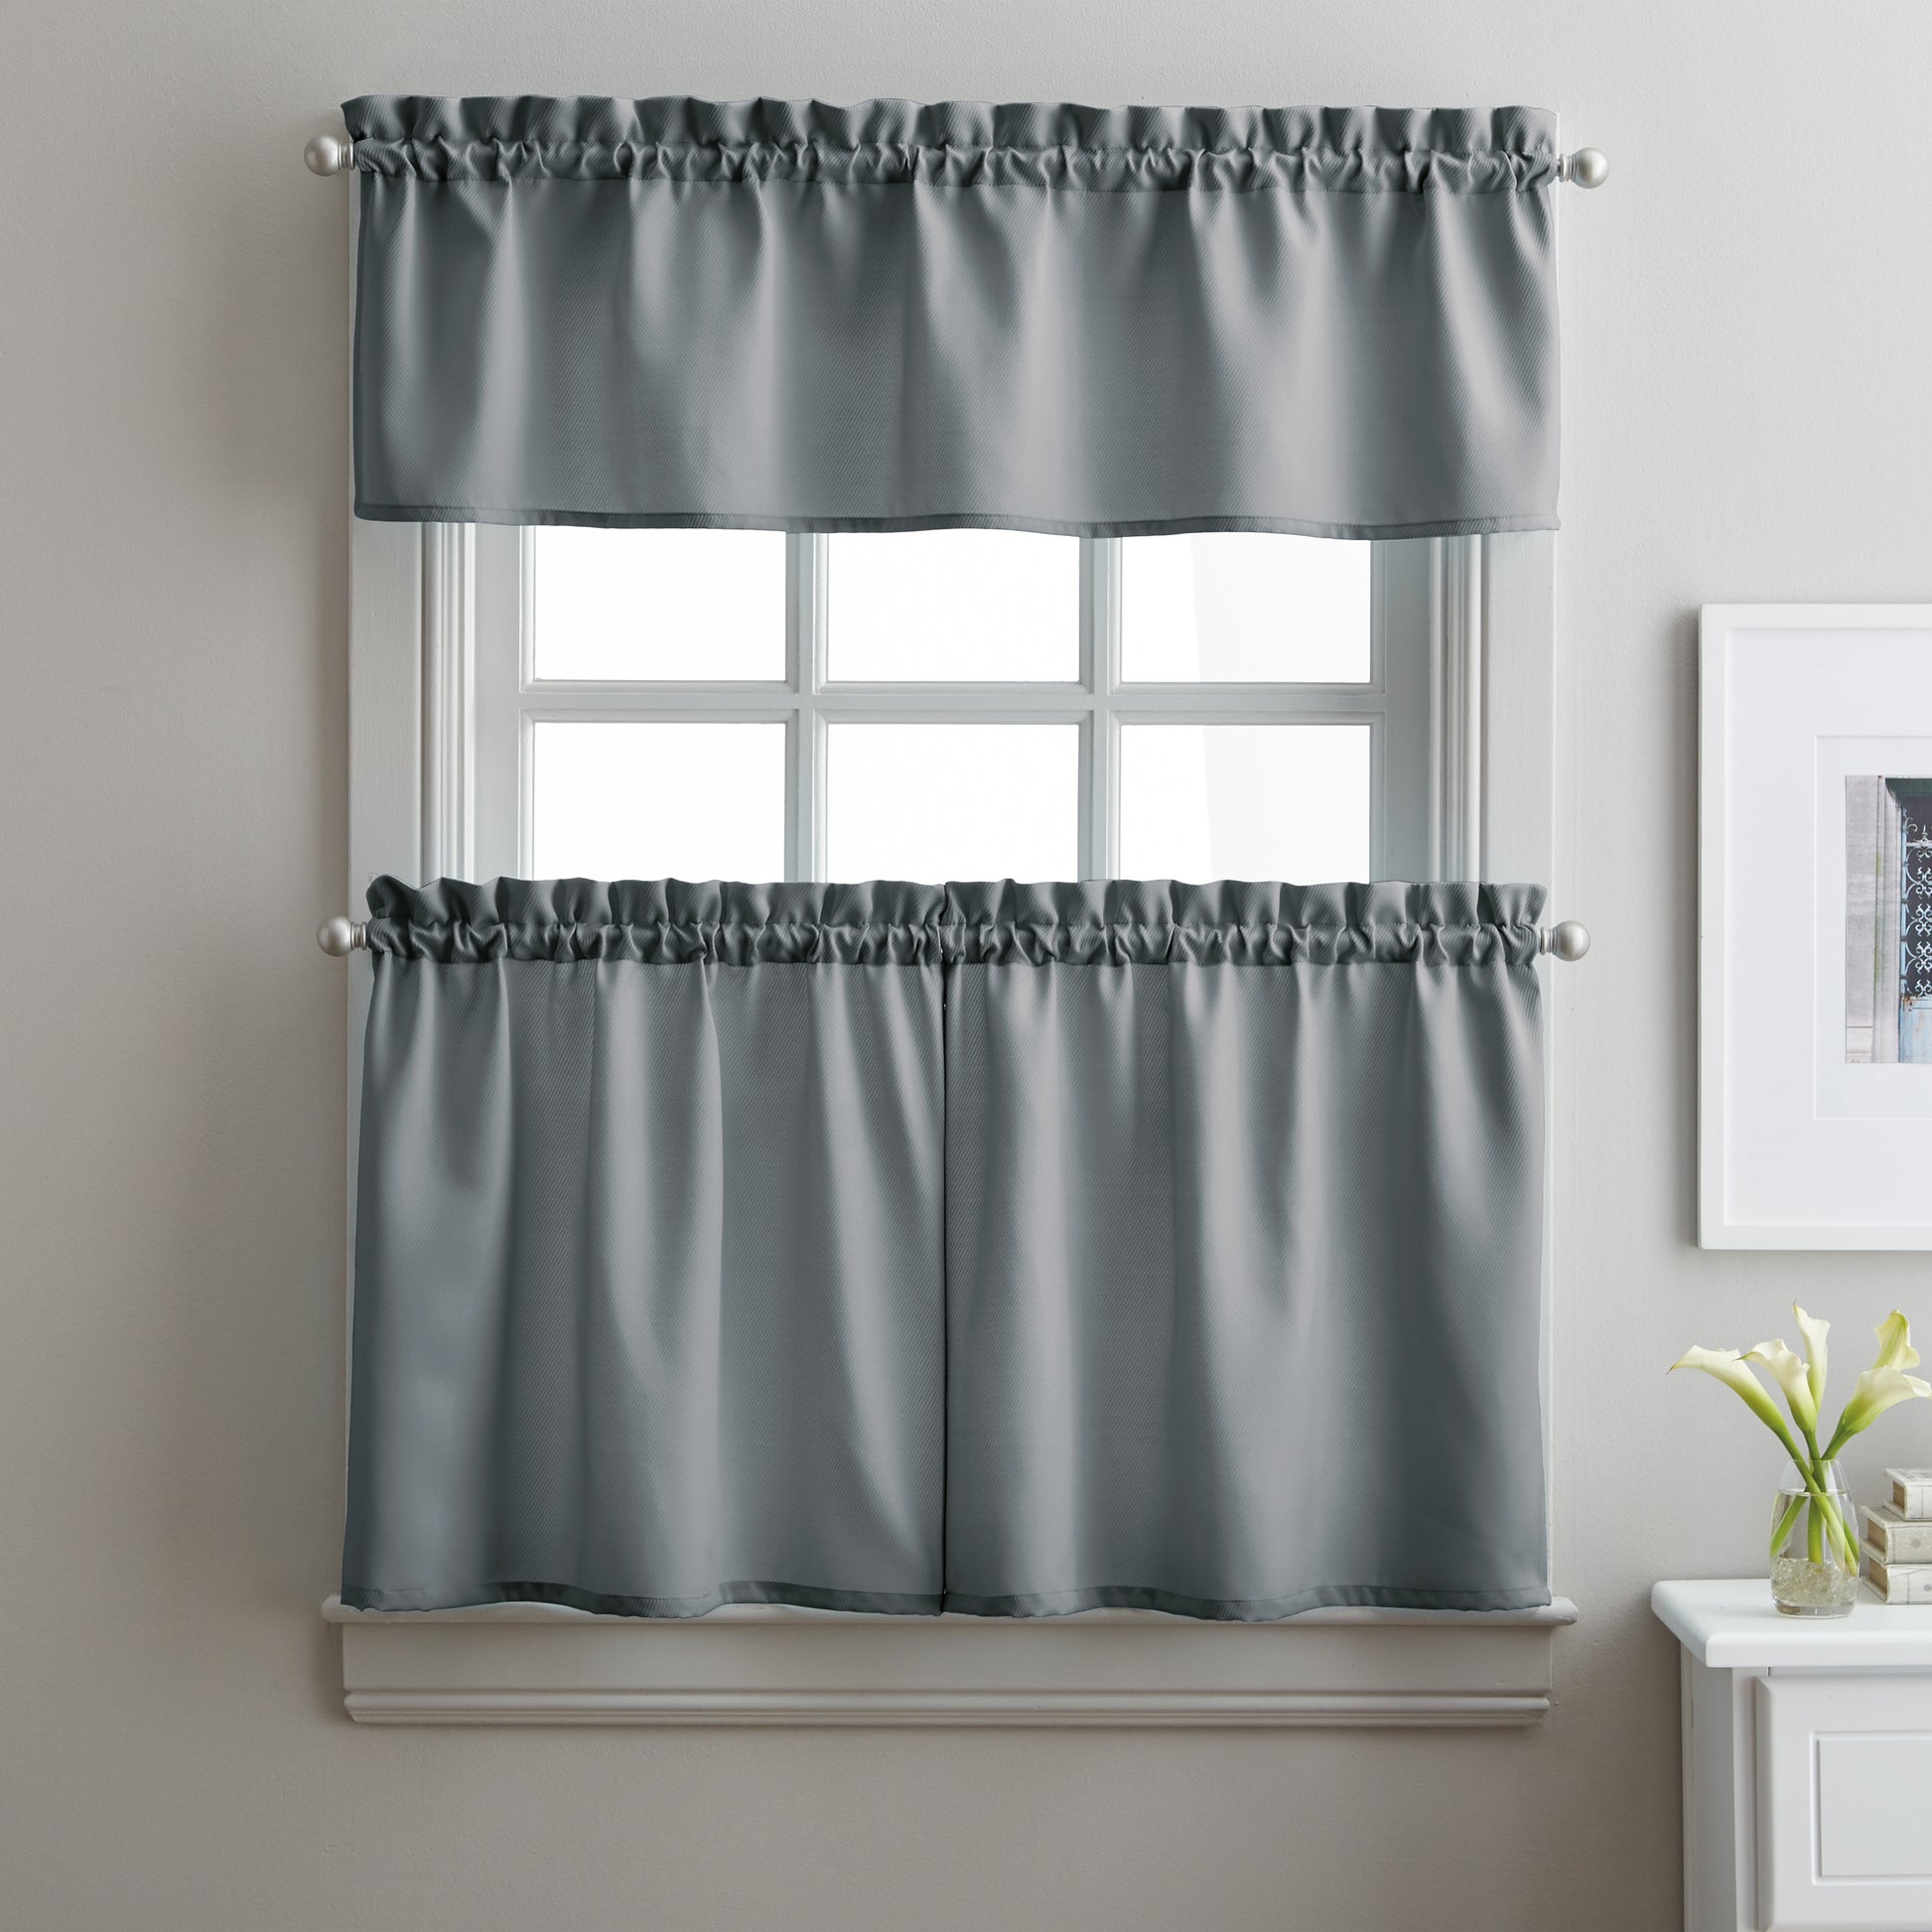 Curtainworks Solid Twill Tiers & Valance Set Grey